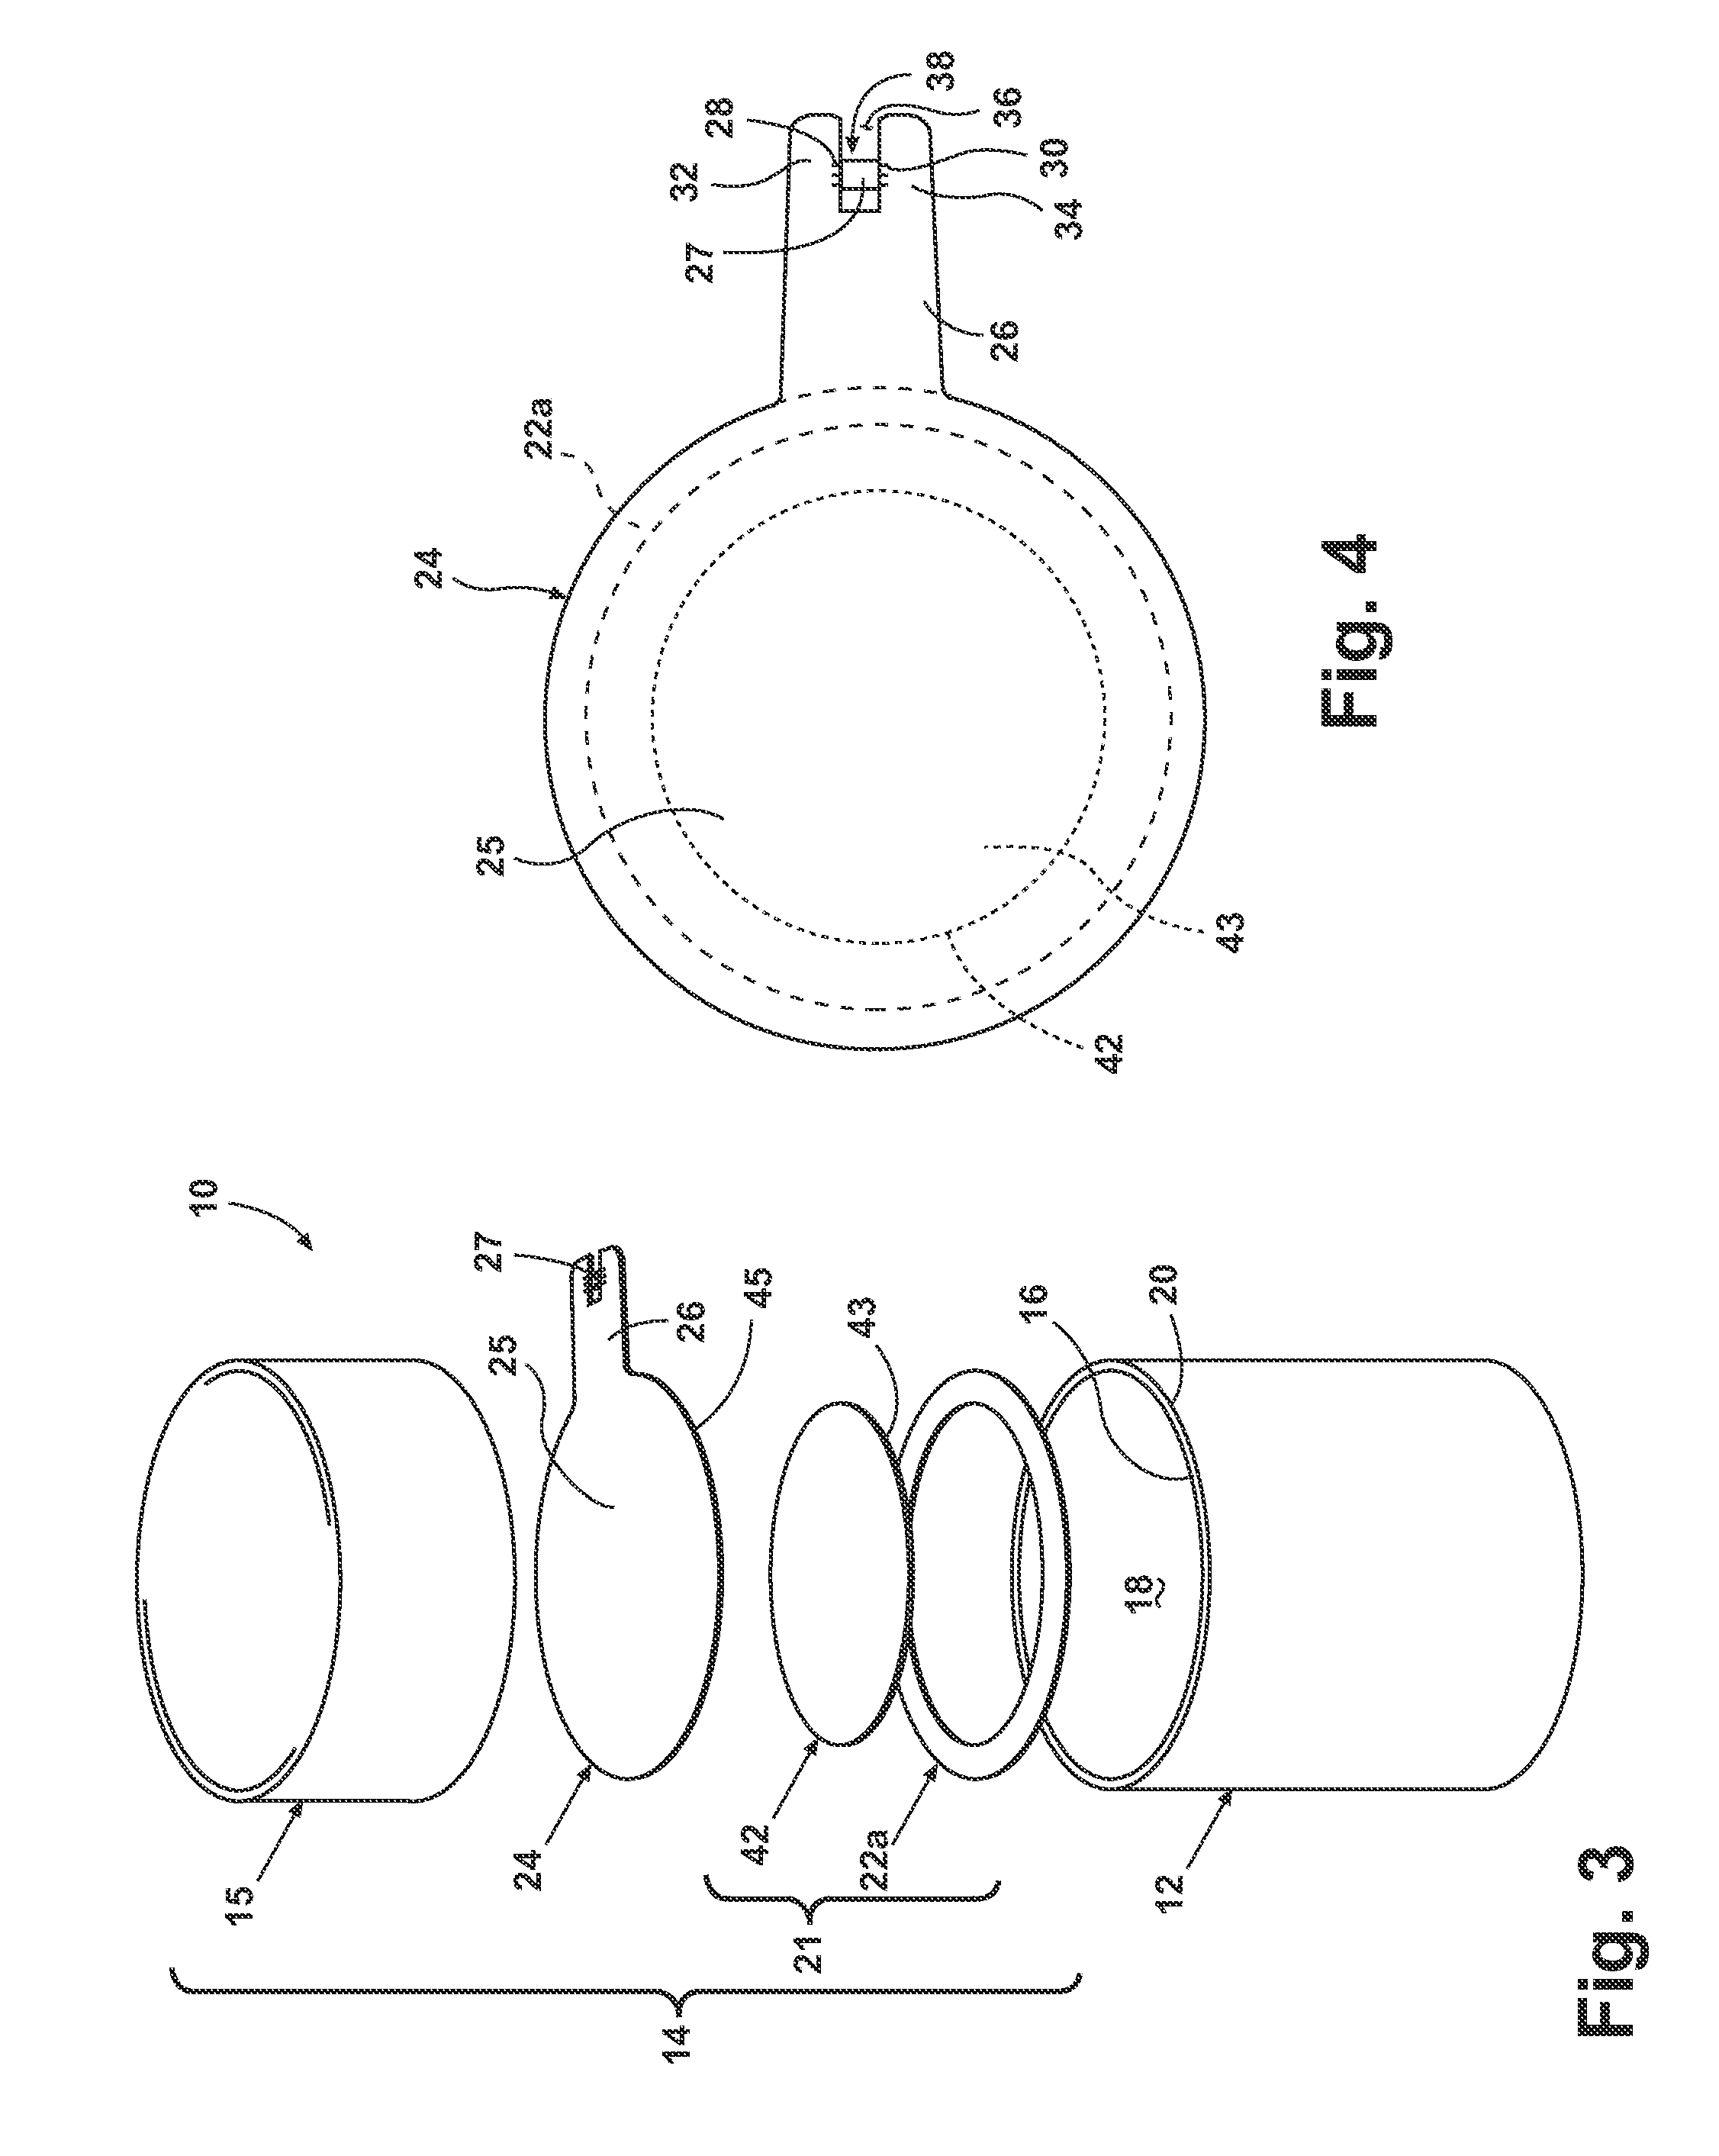 Container seal with radio frequency identification tag, and method of making same